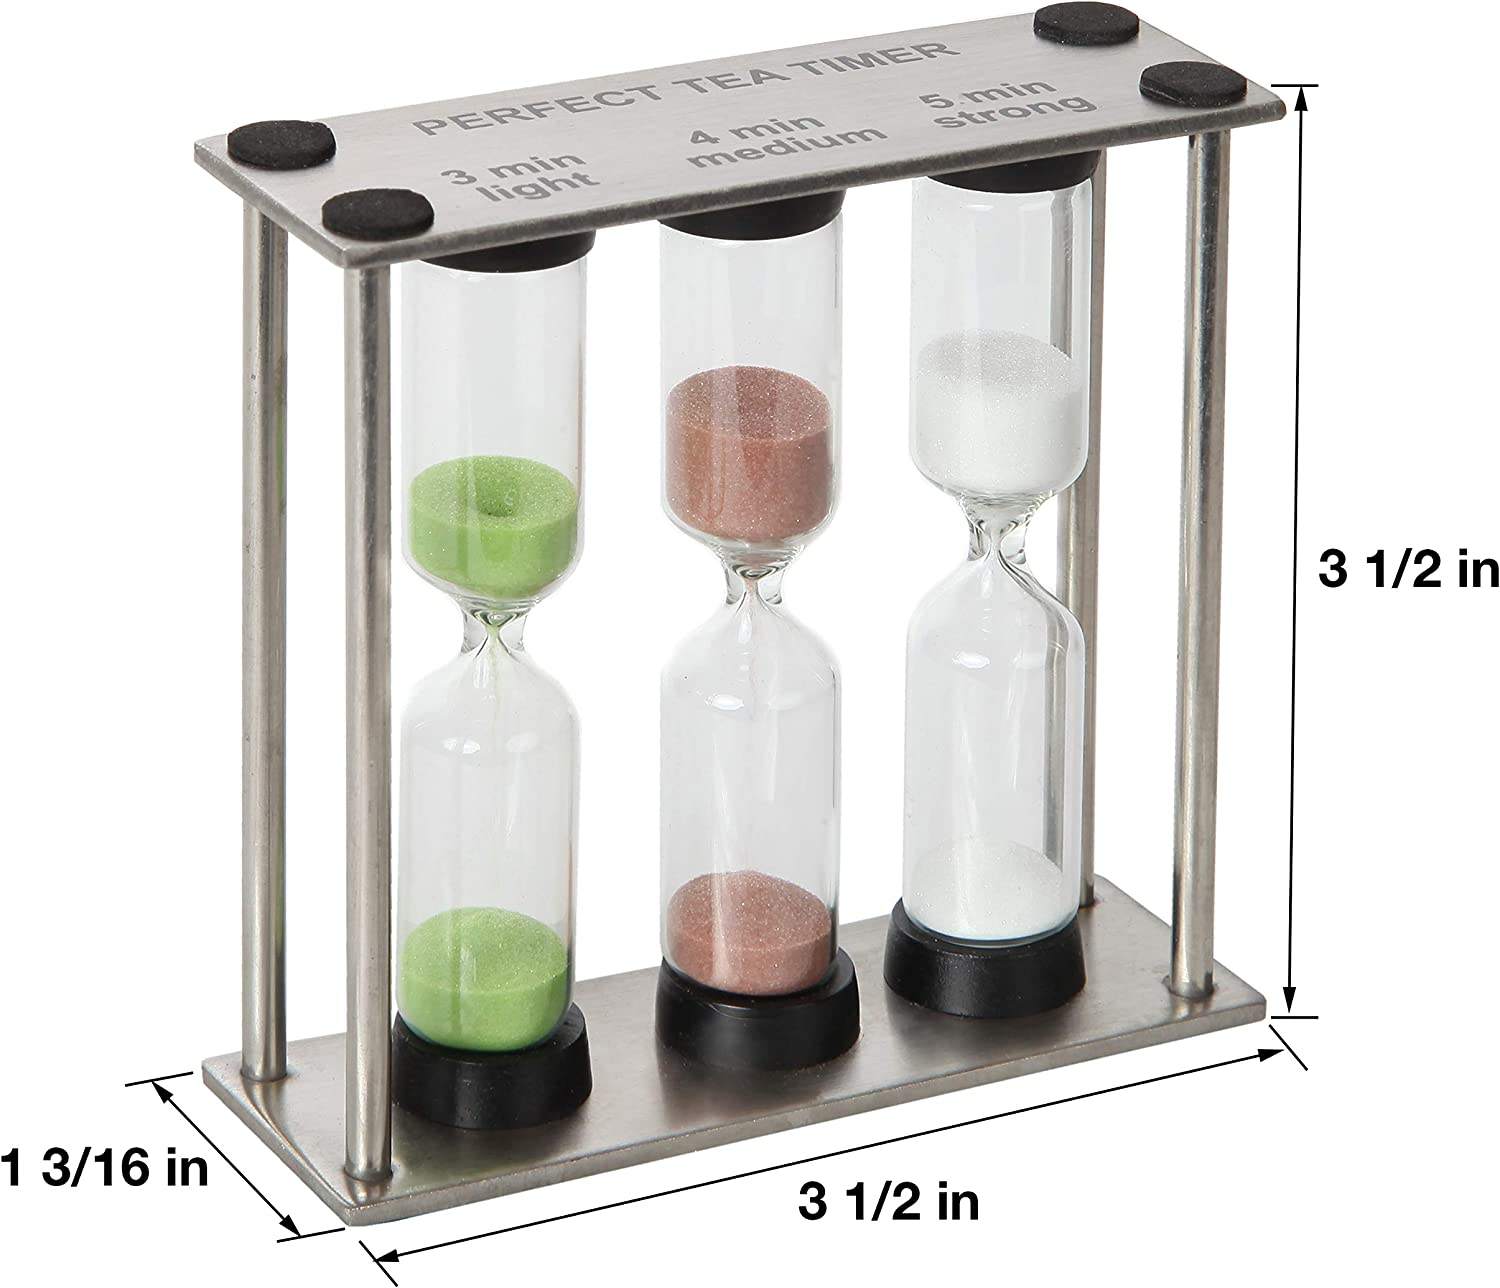 3-in-1 Perfect Tea Timer, Includes 3, 4, and 5 Minute Sand Hourglass Timers, Use for Making Tea or Keeping Time Around Kitchen